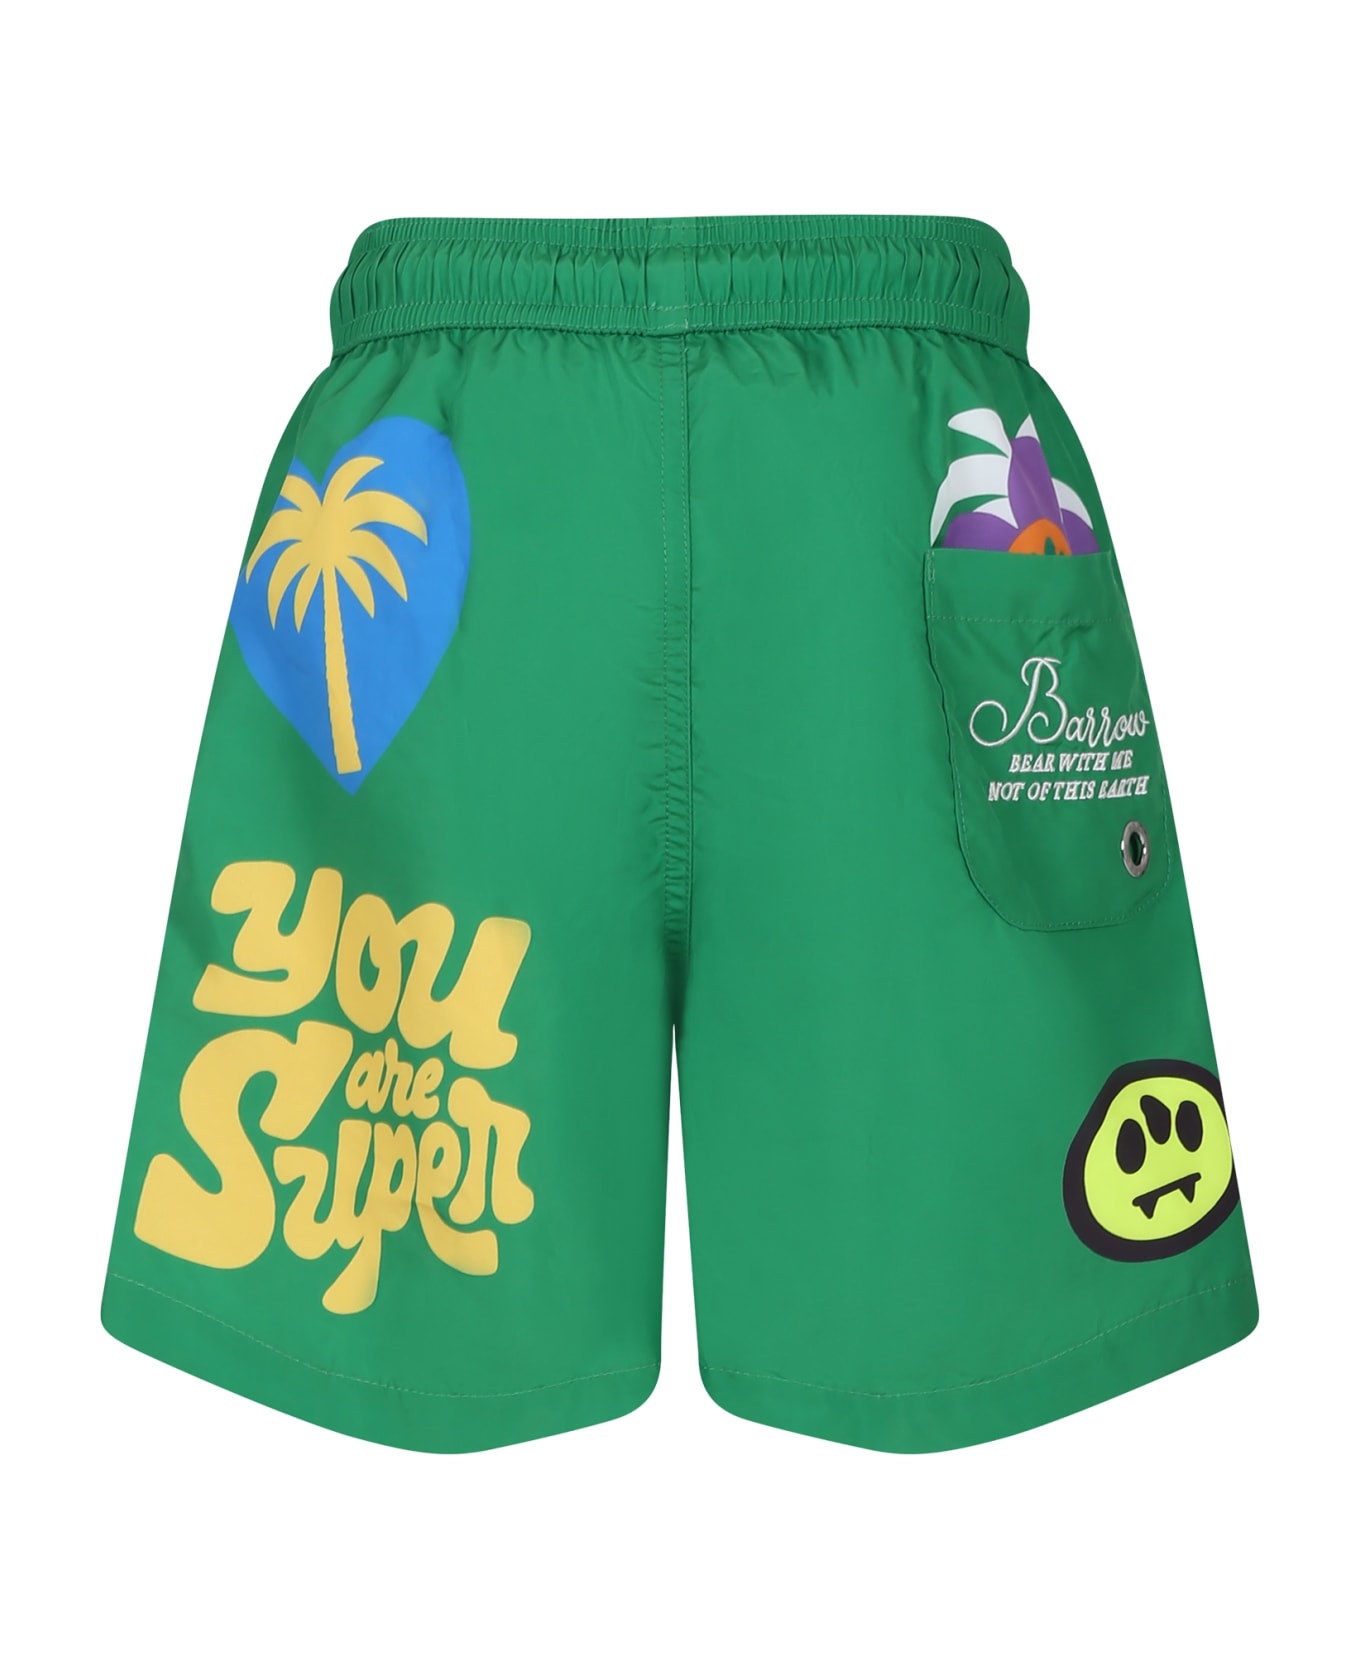 Barrow Green Swim Shorts For Boy With Smiley And Logo - Green